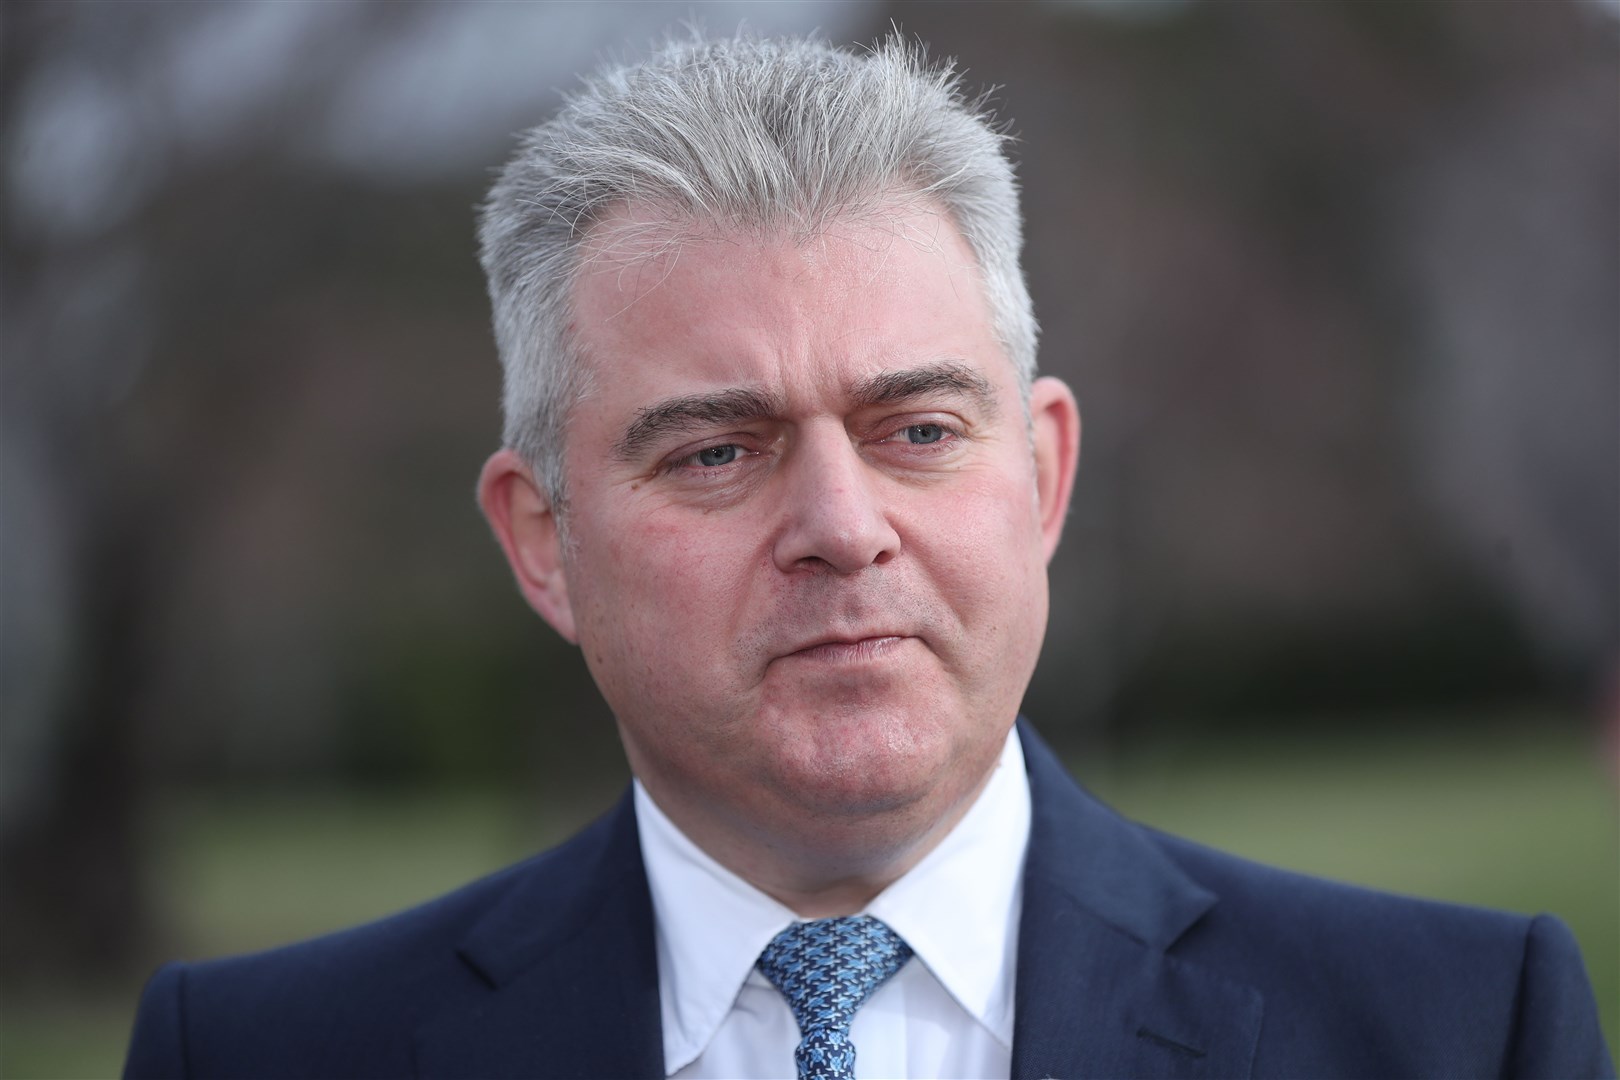 Brandon Lewis said there is a need for greater transparency over Stormont’s spending (Niall Carson/PA)